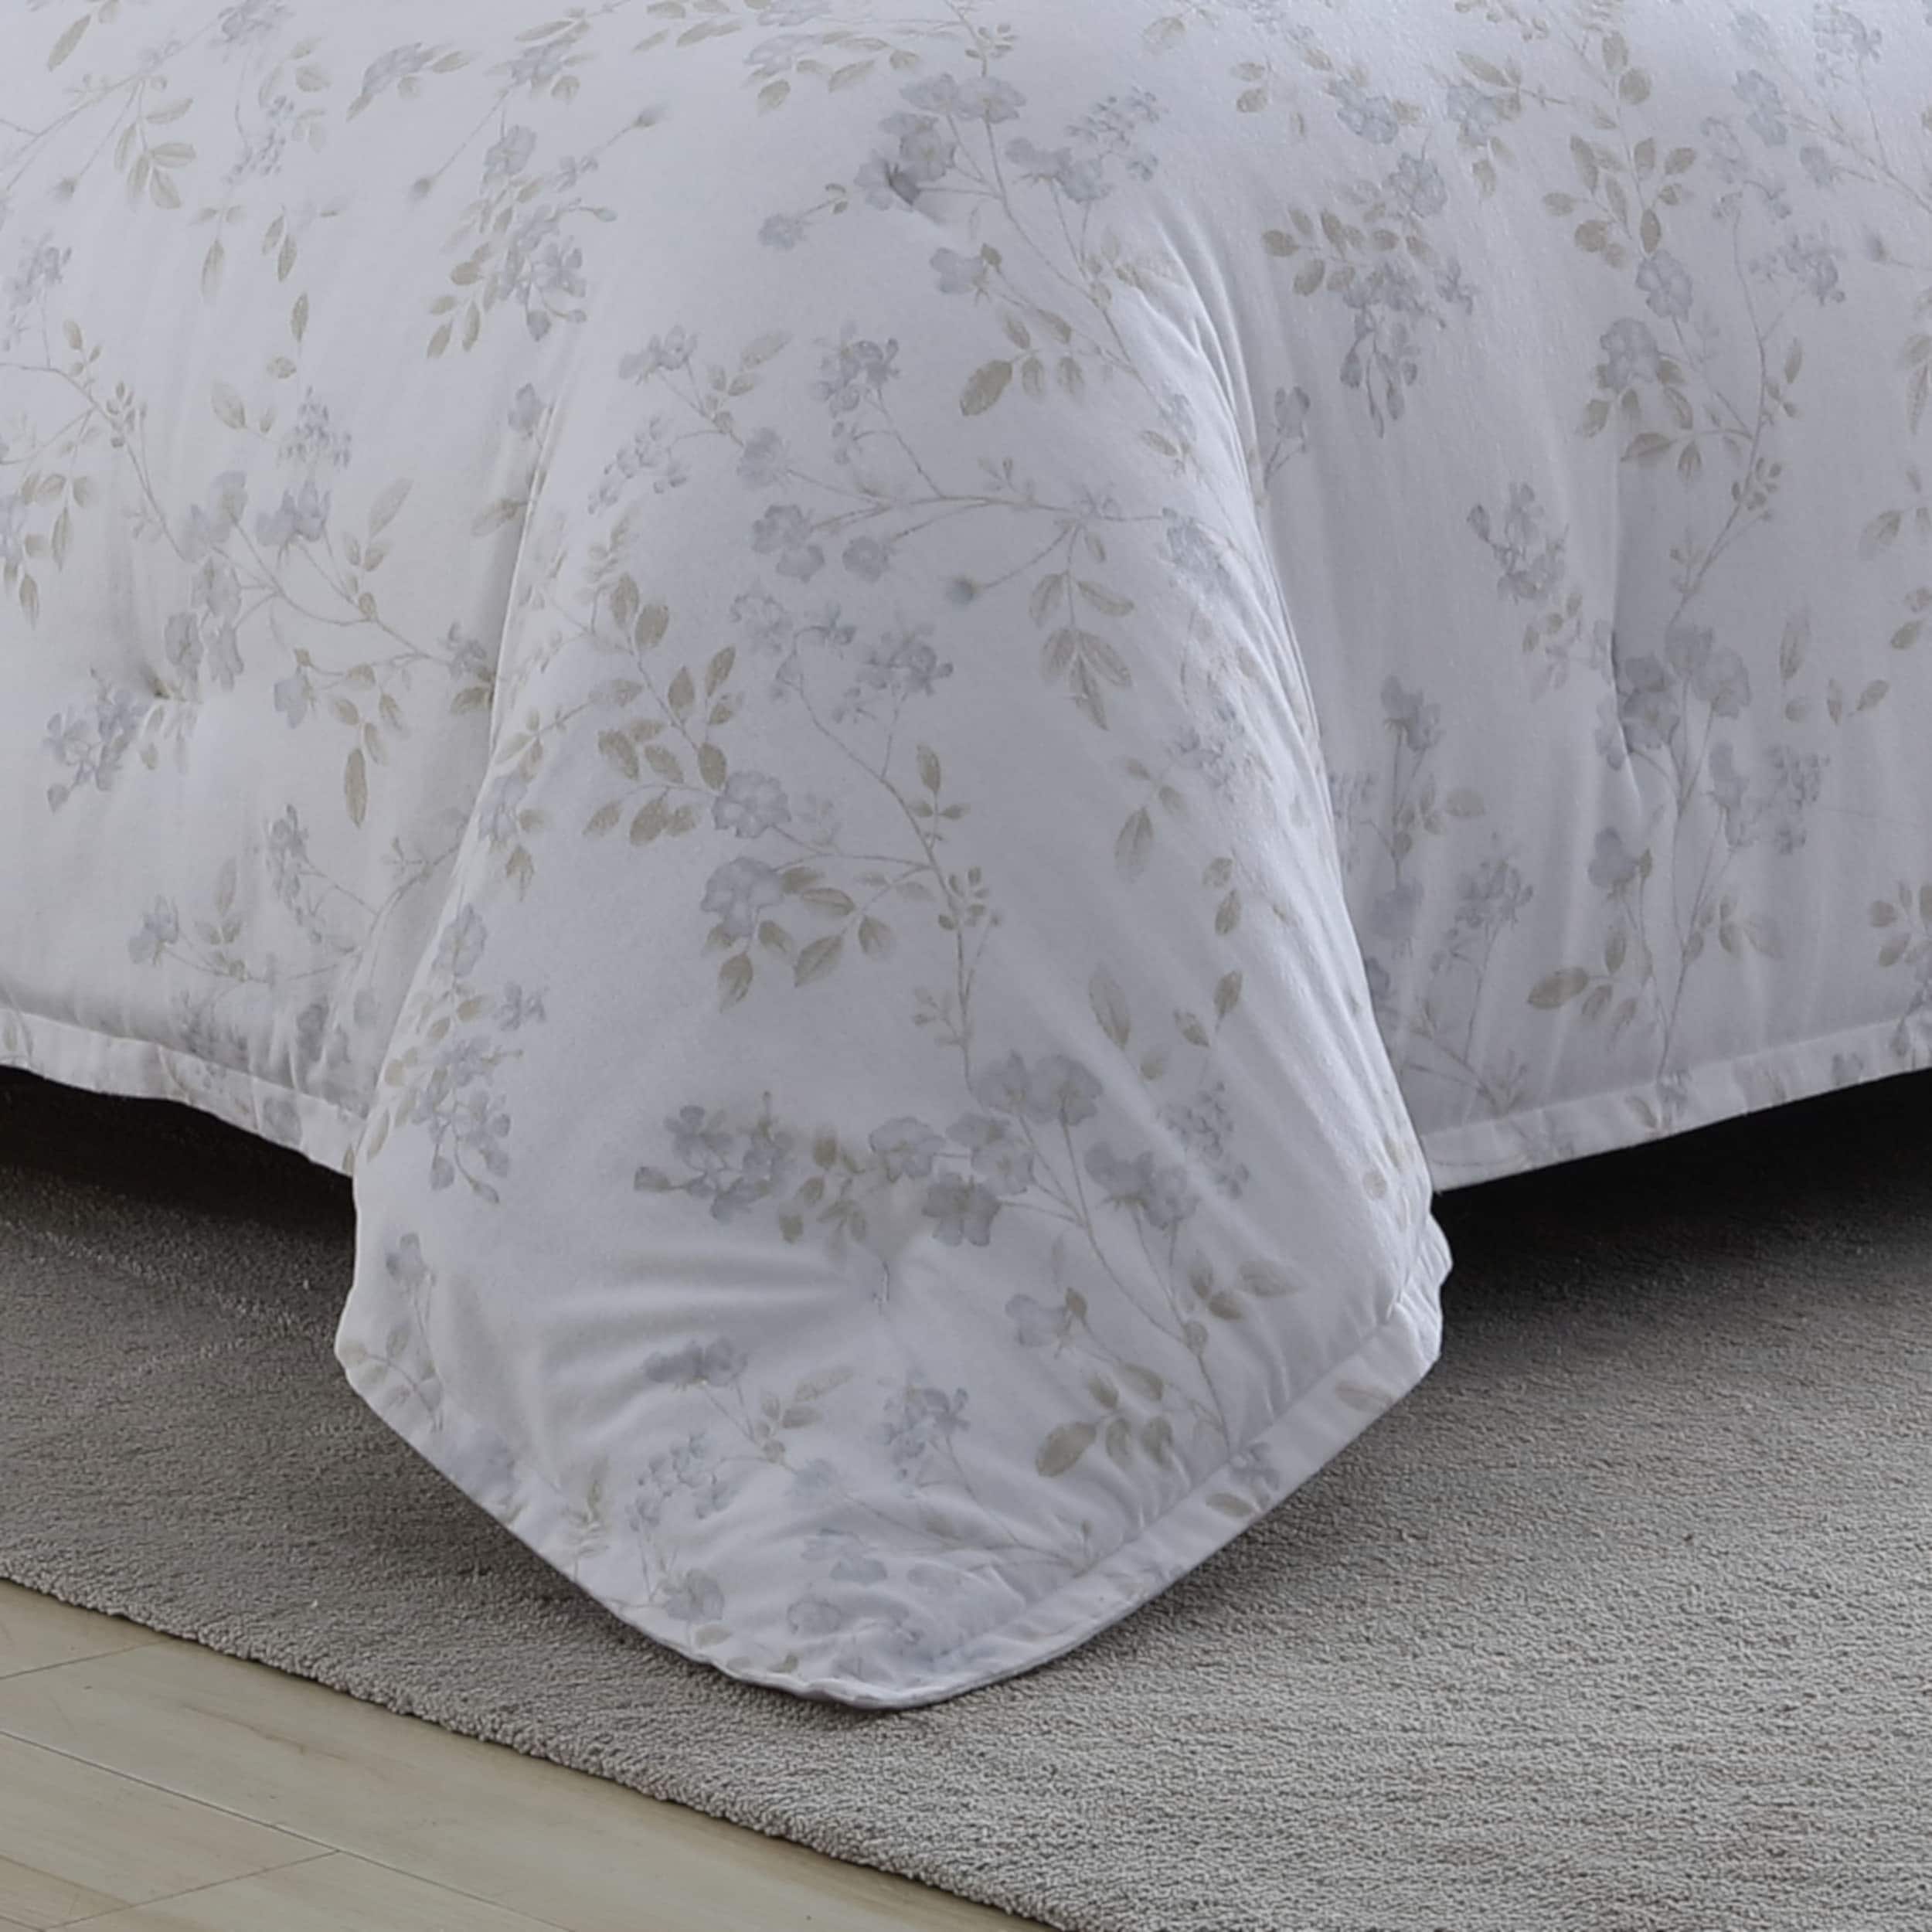 https://ak1.ostkcdn.com/images/products/is/images/direct/8d01660b8f524fc76cb7cefe704099c731e5679d/Laura-Ashley-Fawna-Flannel-Comforter-Set.jpg